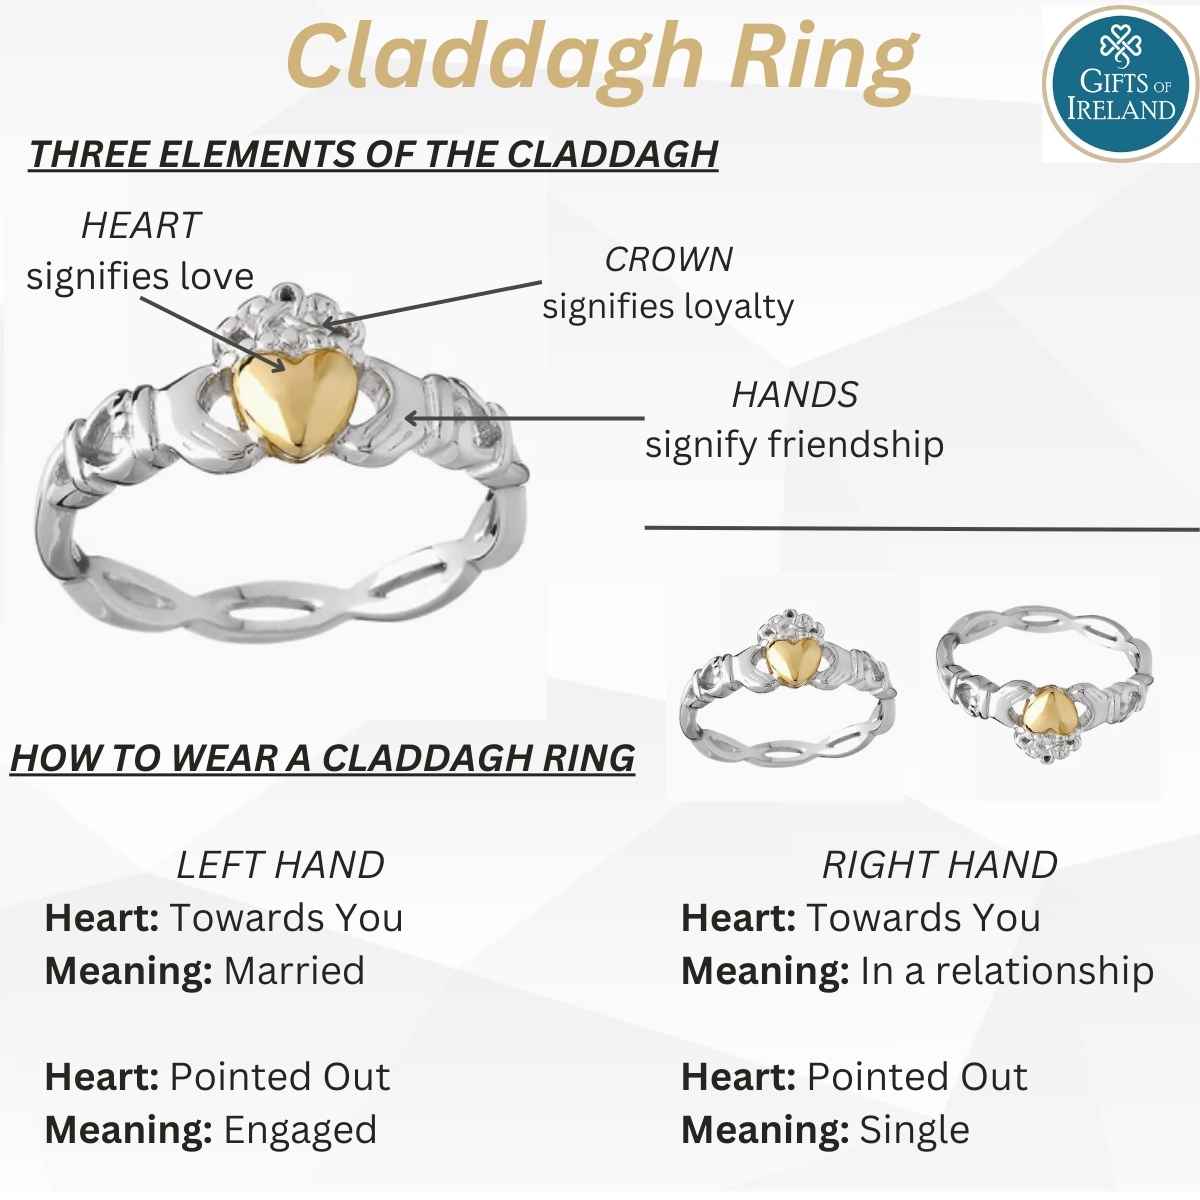 Shanore Ladies Sterling Silver Claddagh Ring